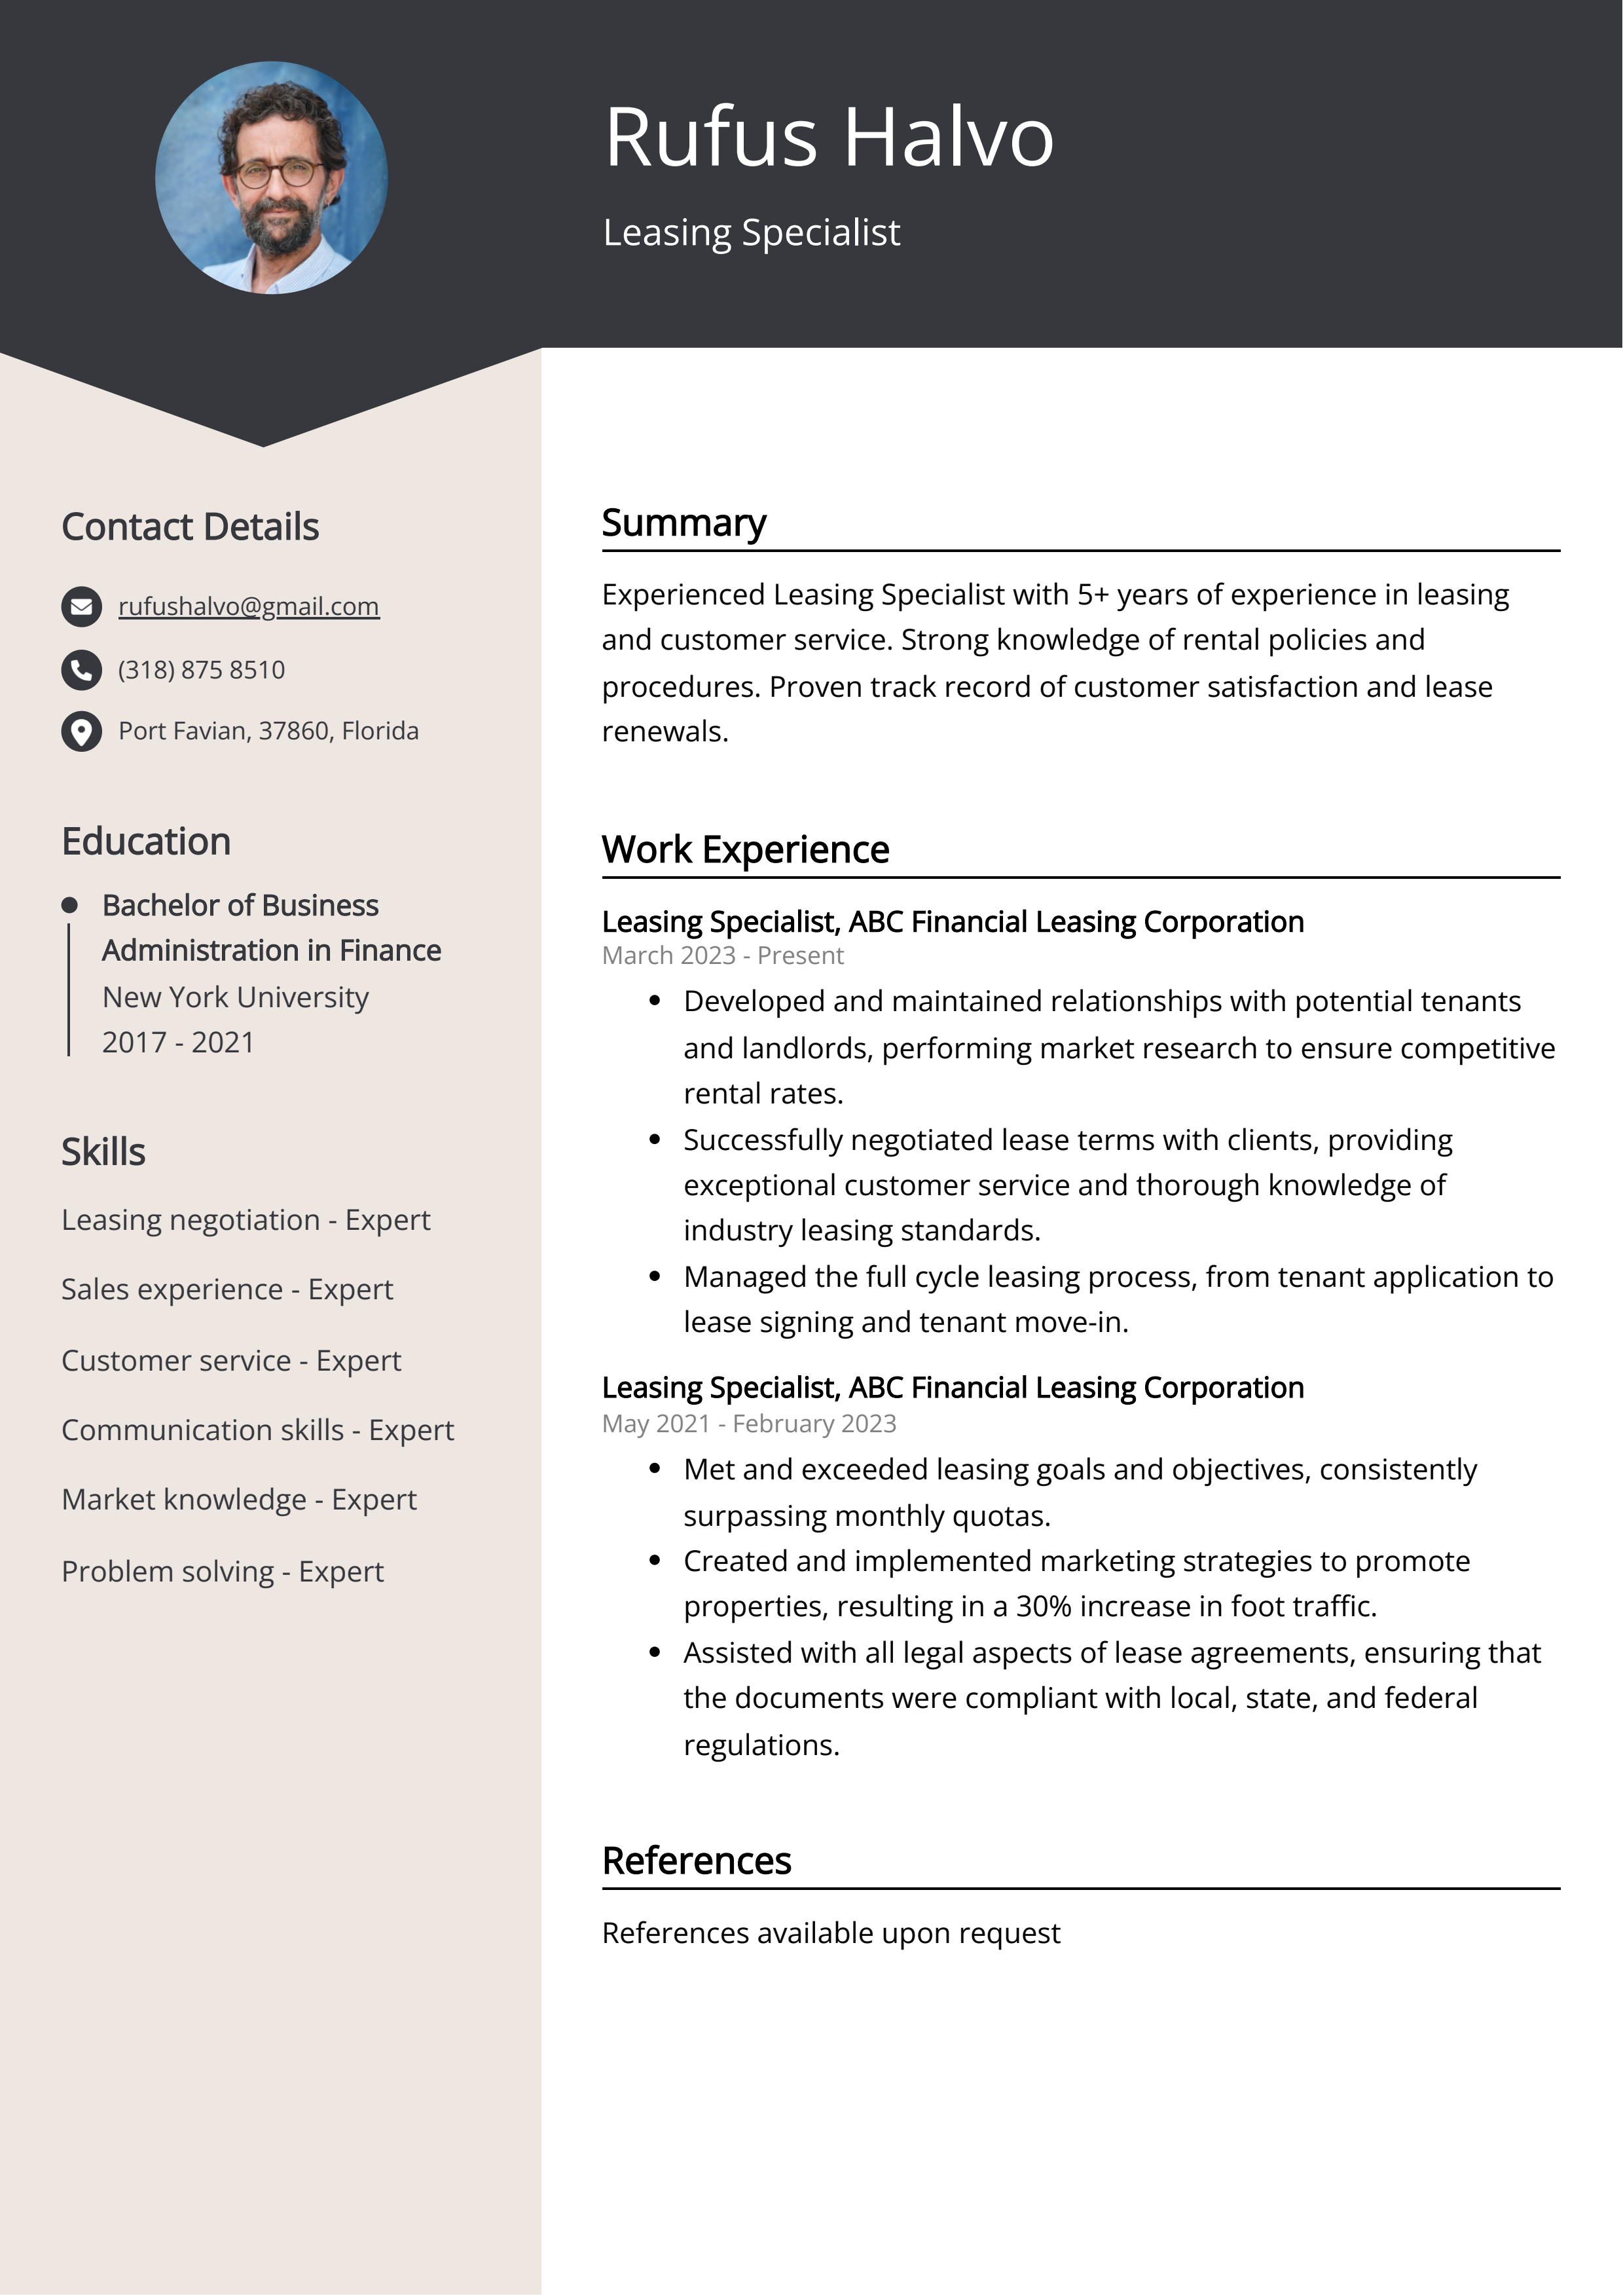 Leasing Specialist CV Example